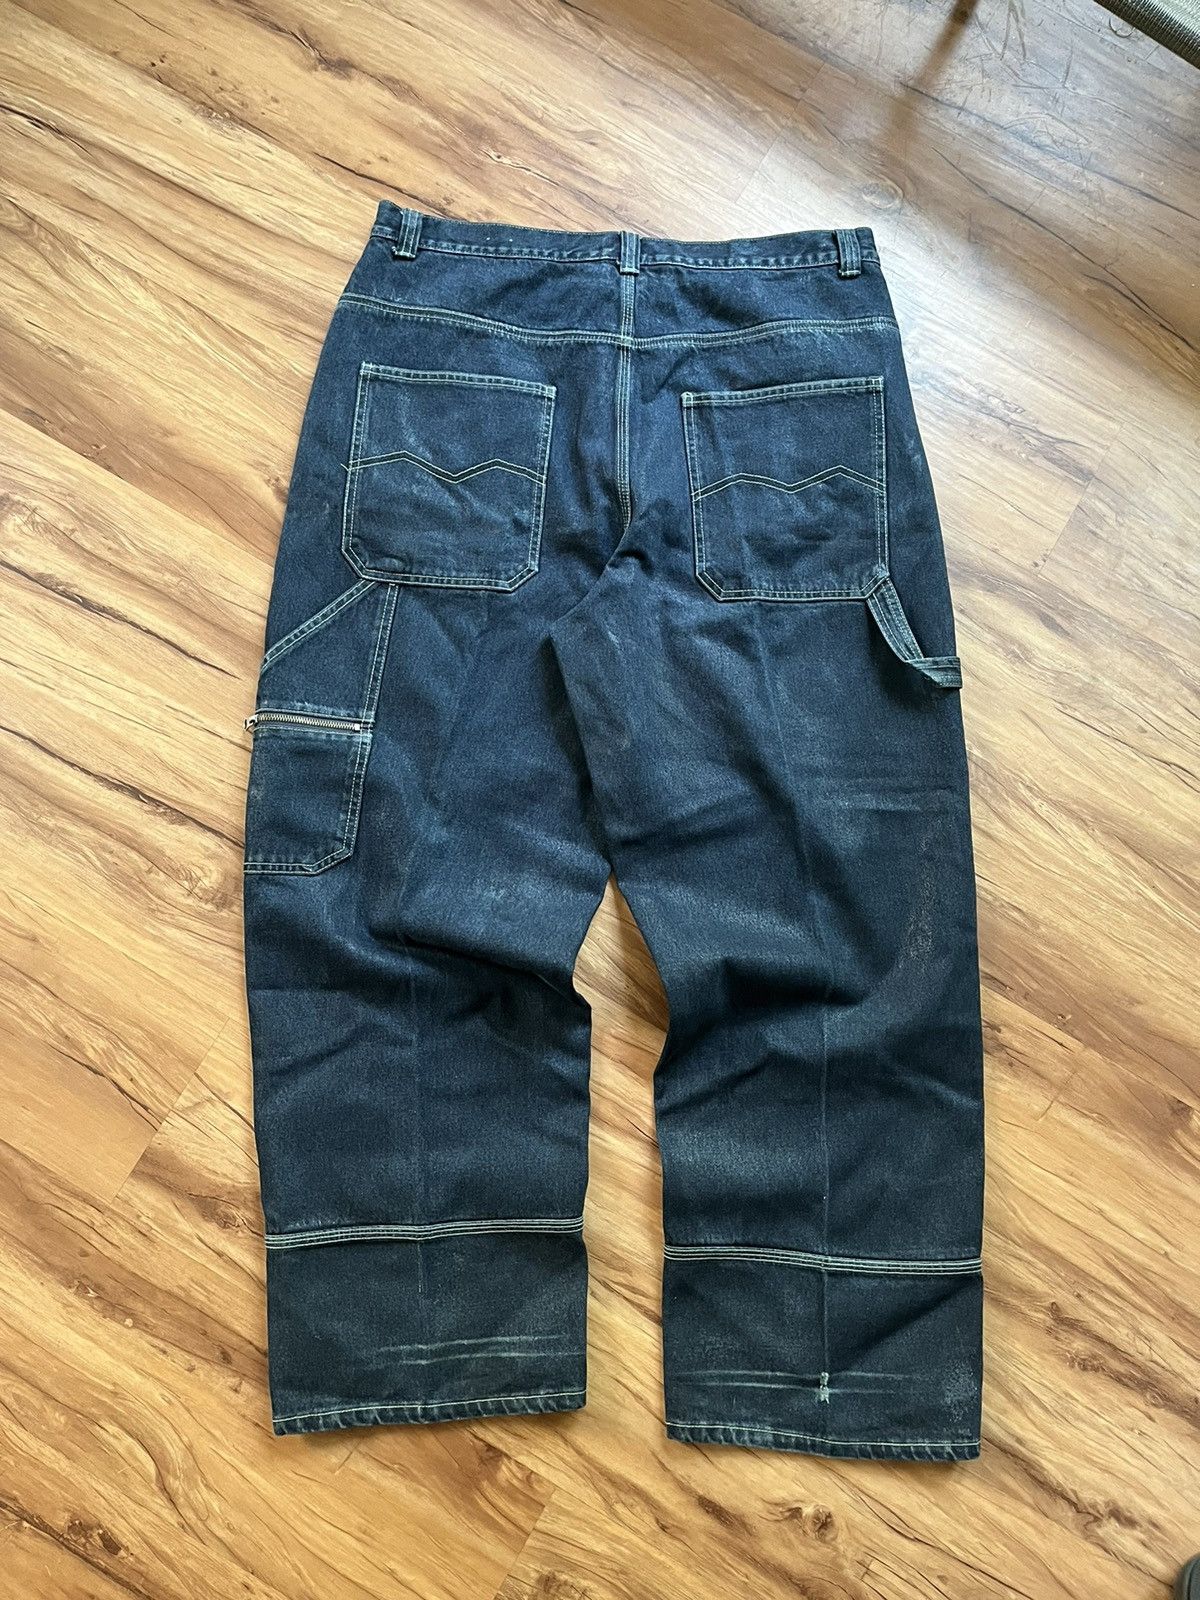 Pre-owned Hype X Vintage Crazy Vintage Baggy Decoded Jnco Carpenter Cargo Skate Jeans In Blue Jean